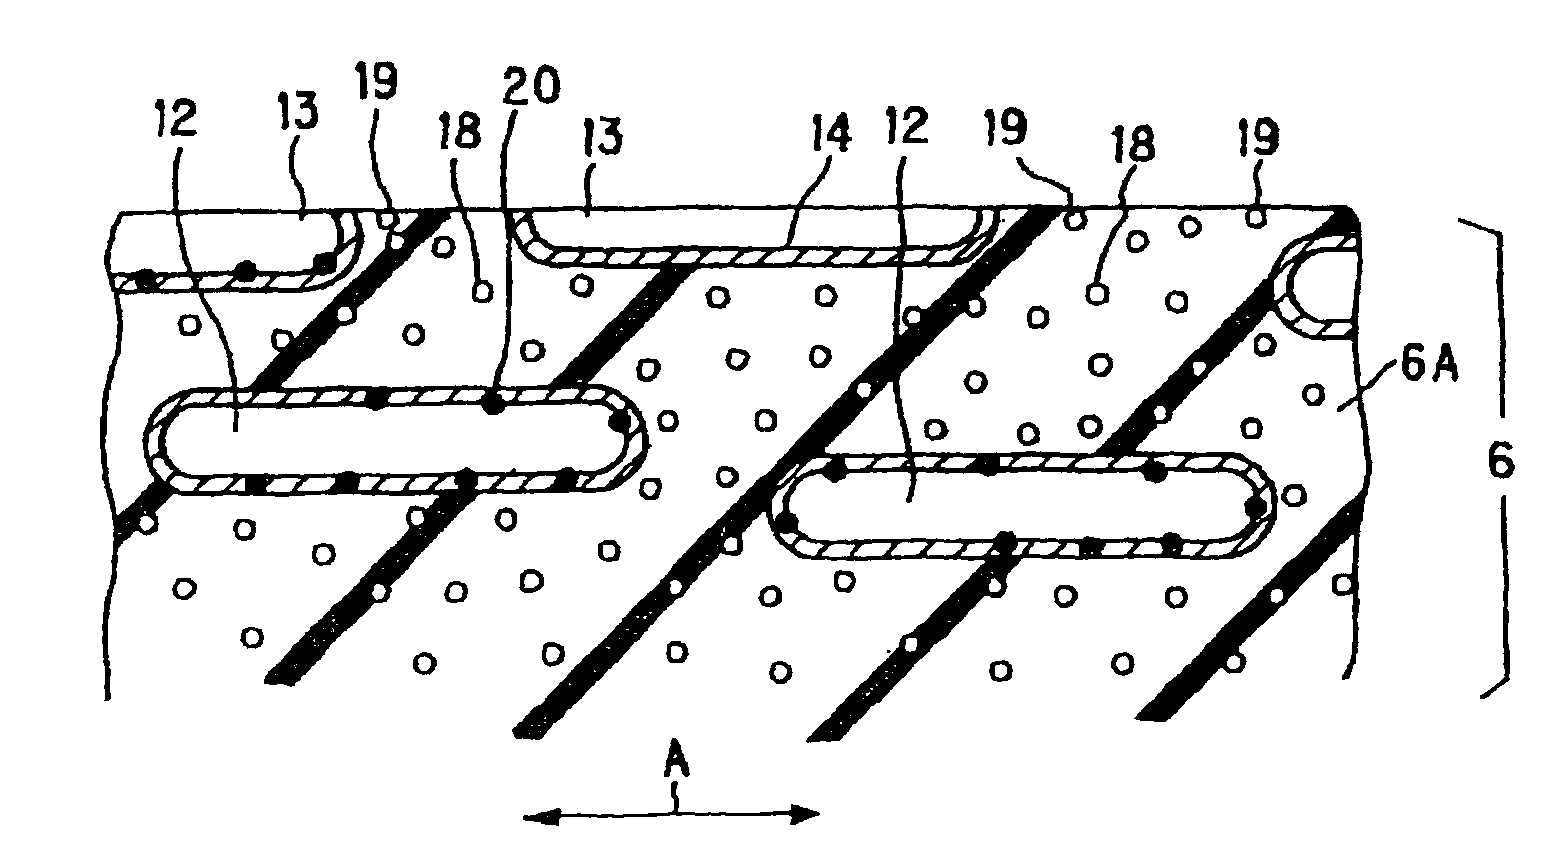 Tire with foamed rubber layer having organic fibers and inorganic compound powder